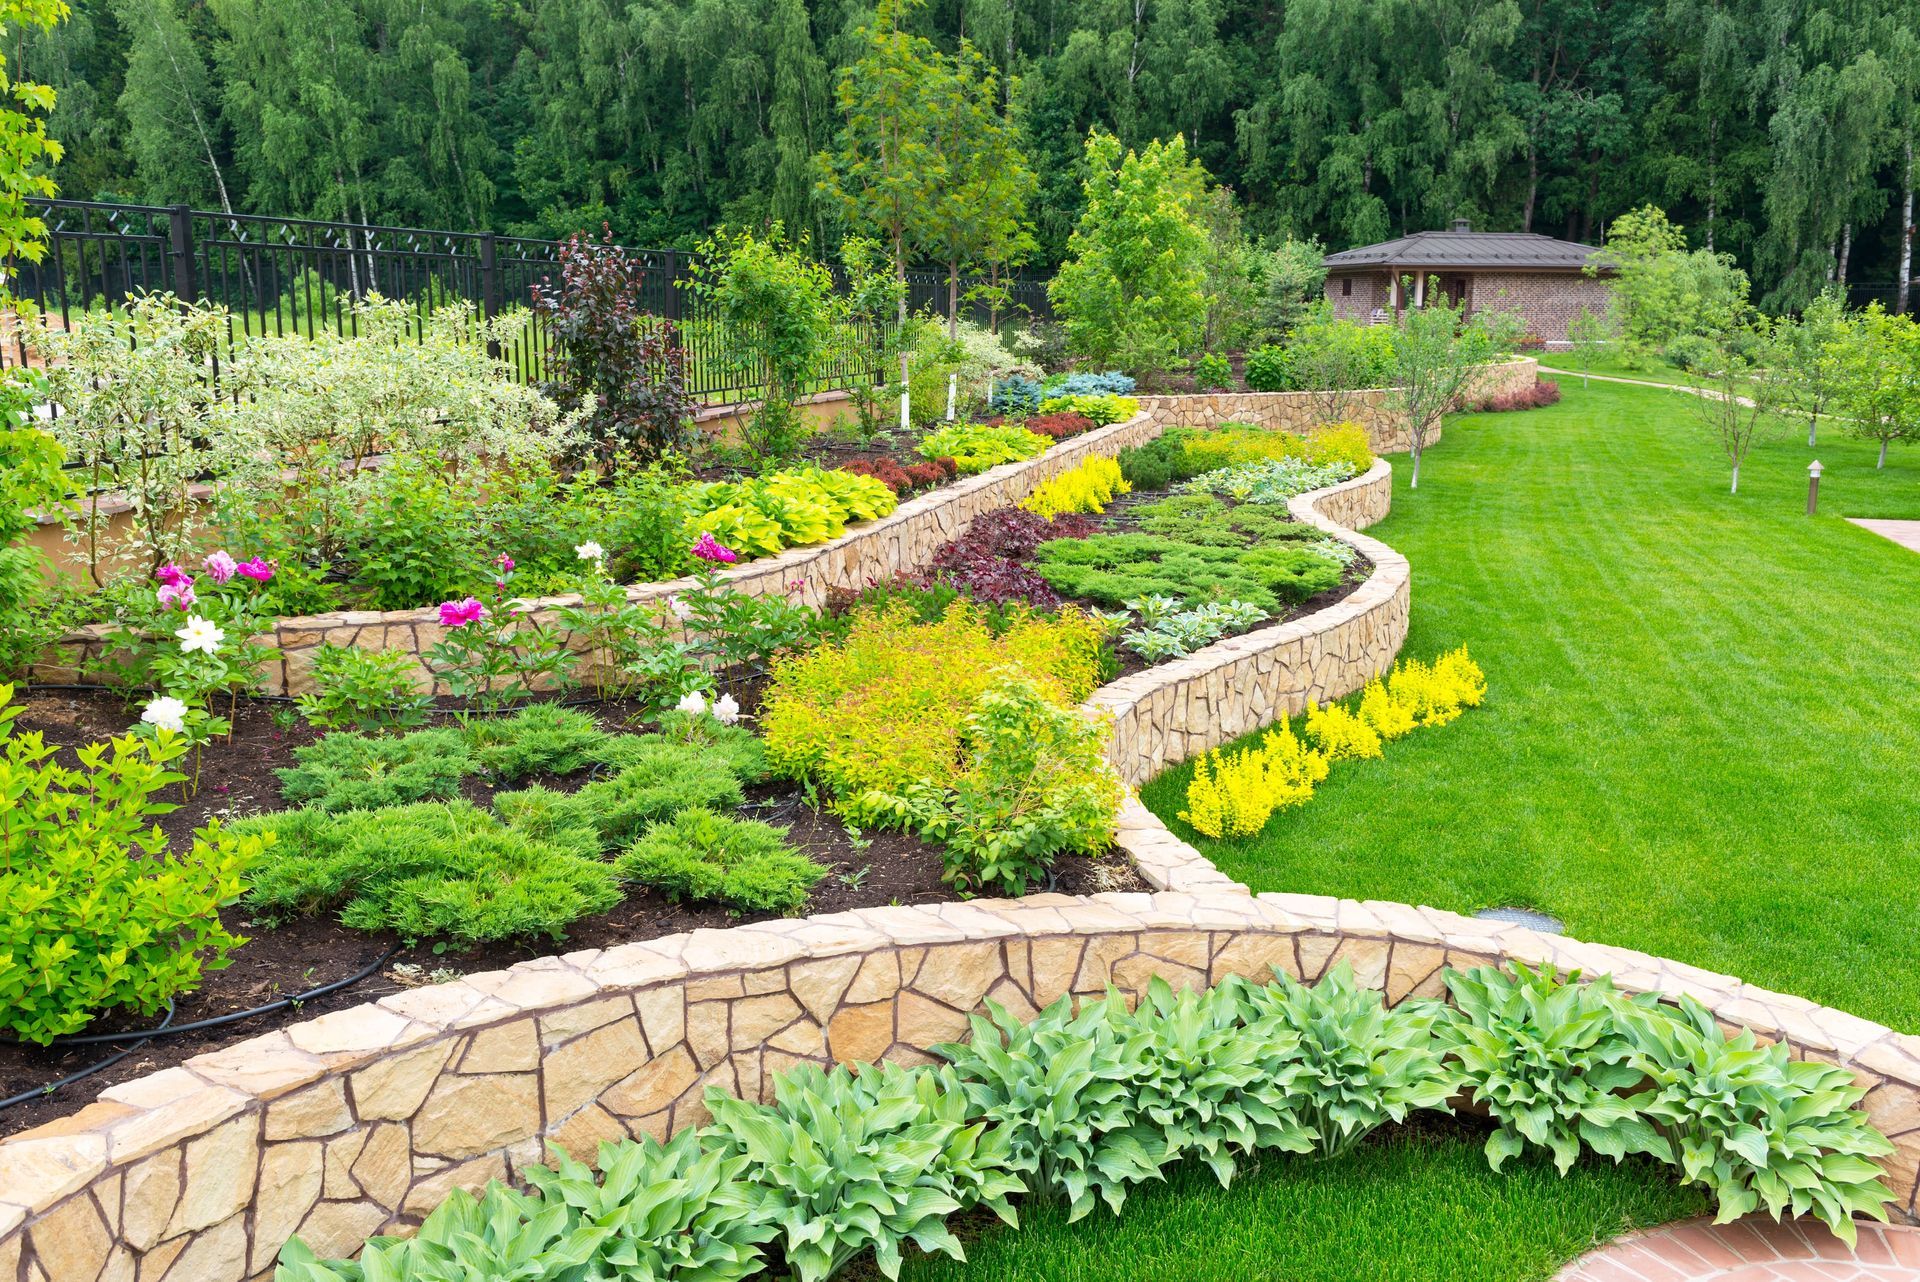 Retaining wall with flower beds